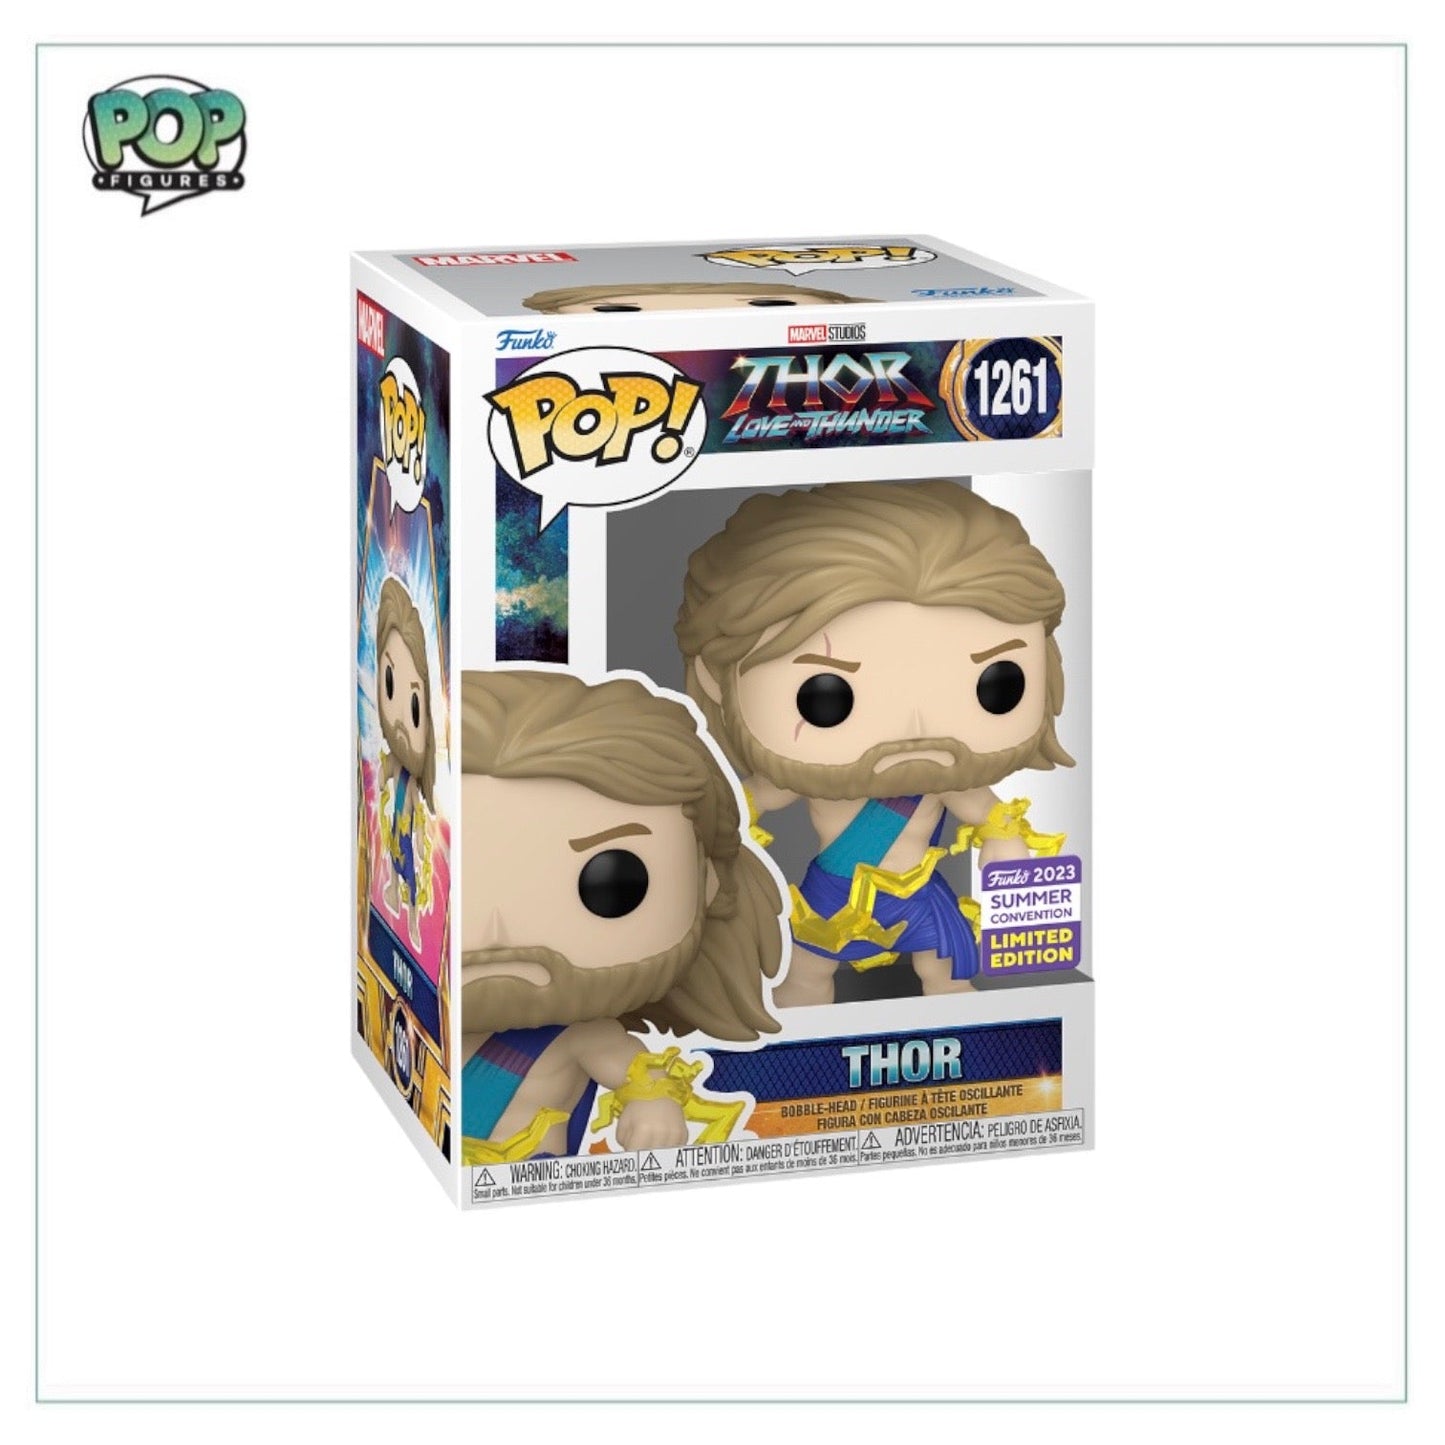 Thor #1261 Funko Pop! - Thor Love and Thunder - SDCC 2023 Shared Exclusive - Angry Cat